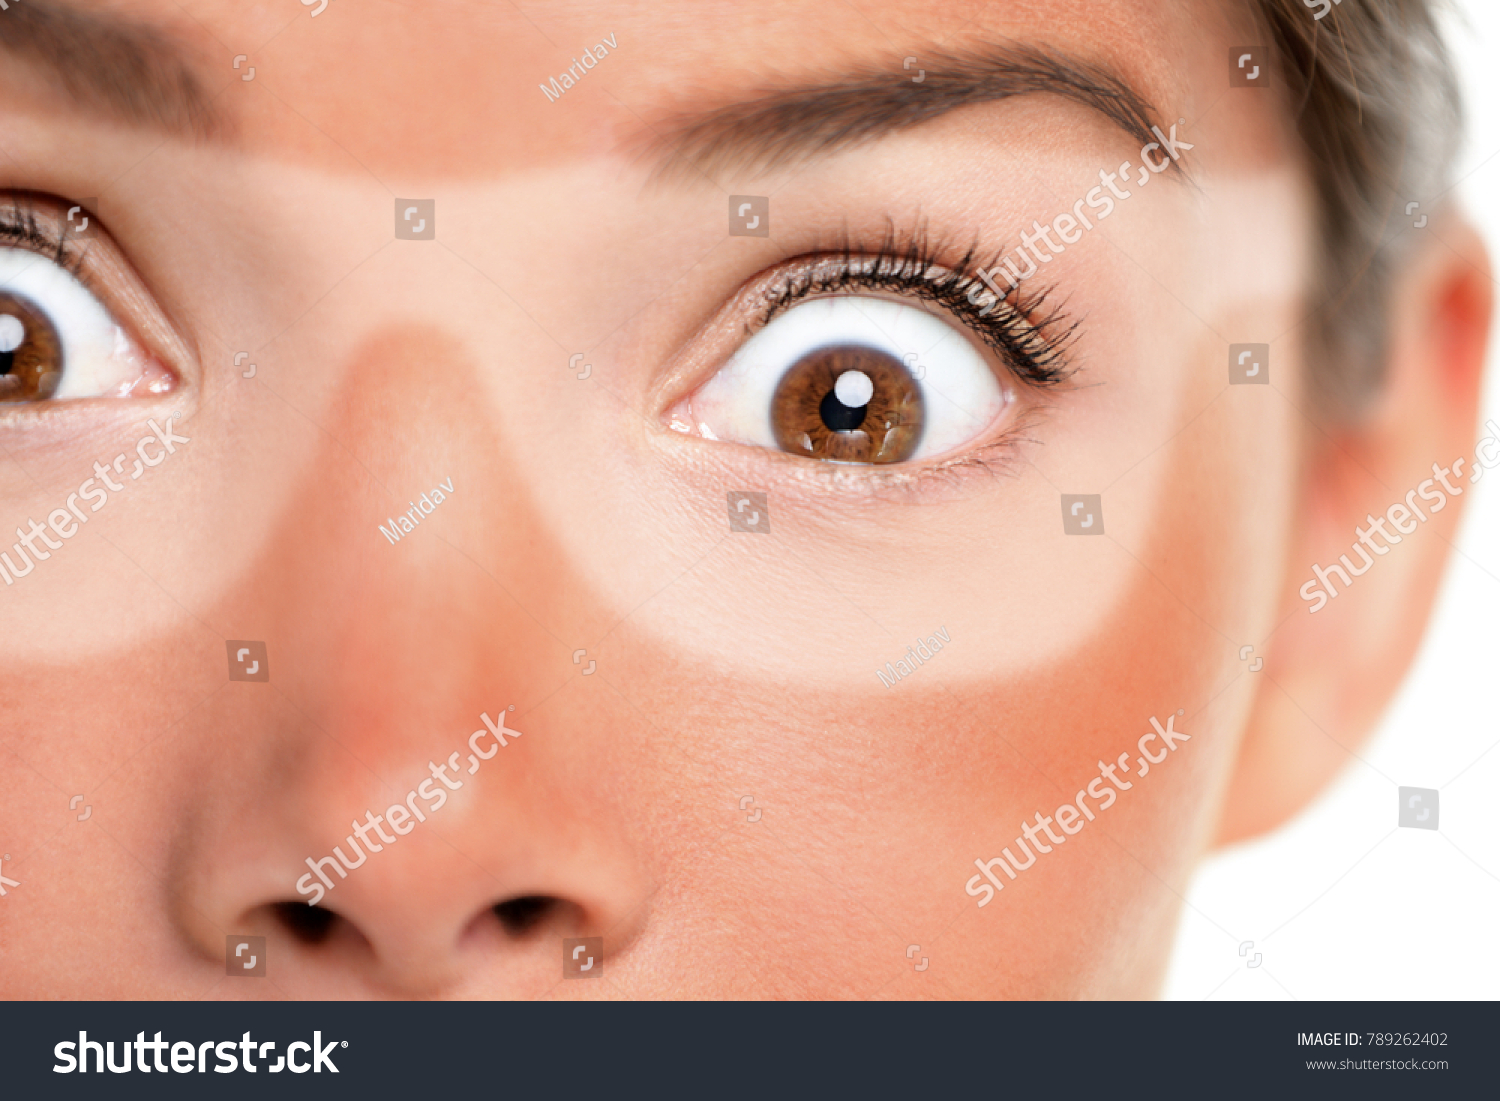 Sunburn tan lines of sunglasses, red painful skin. Scared Asian woman shocked with funny expression forgot to put sunscreen on face on summer vacation. Suntan skin cancer facial care concept. #789262402